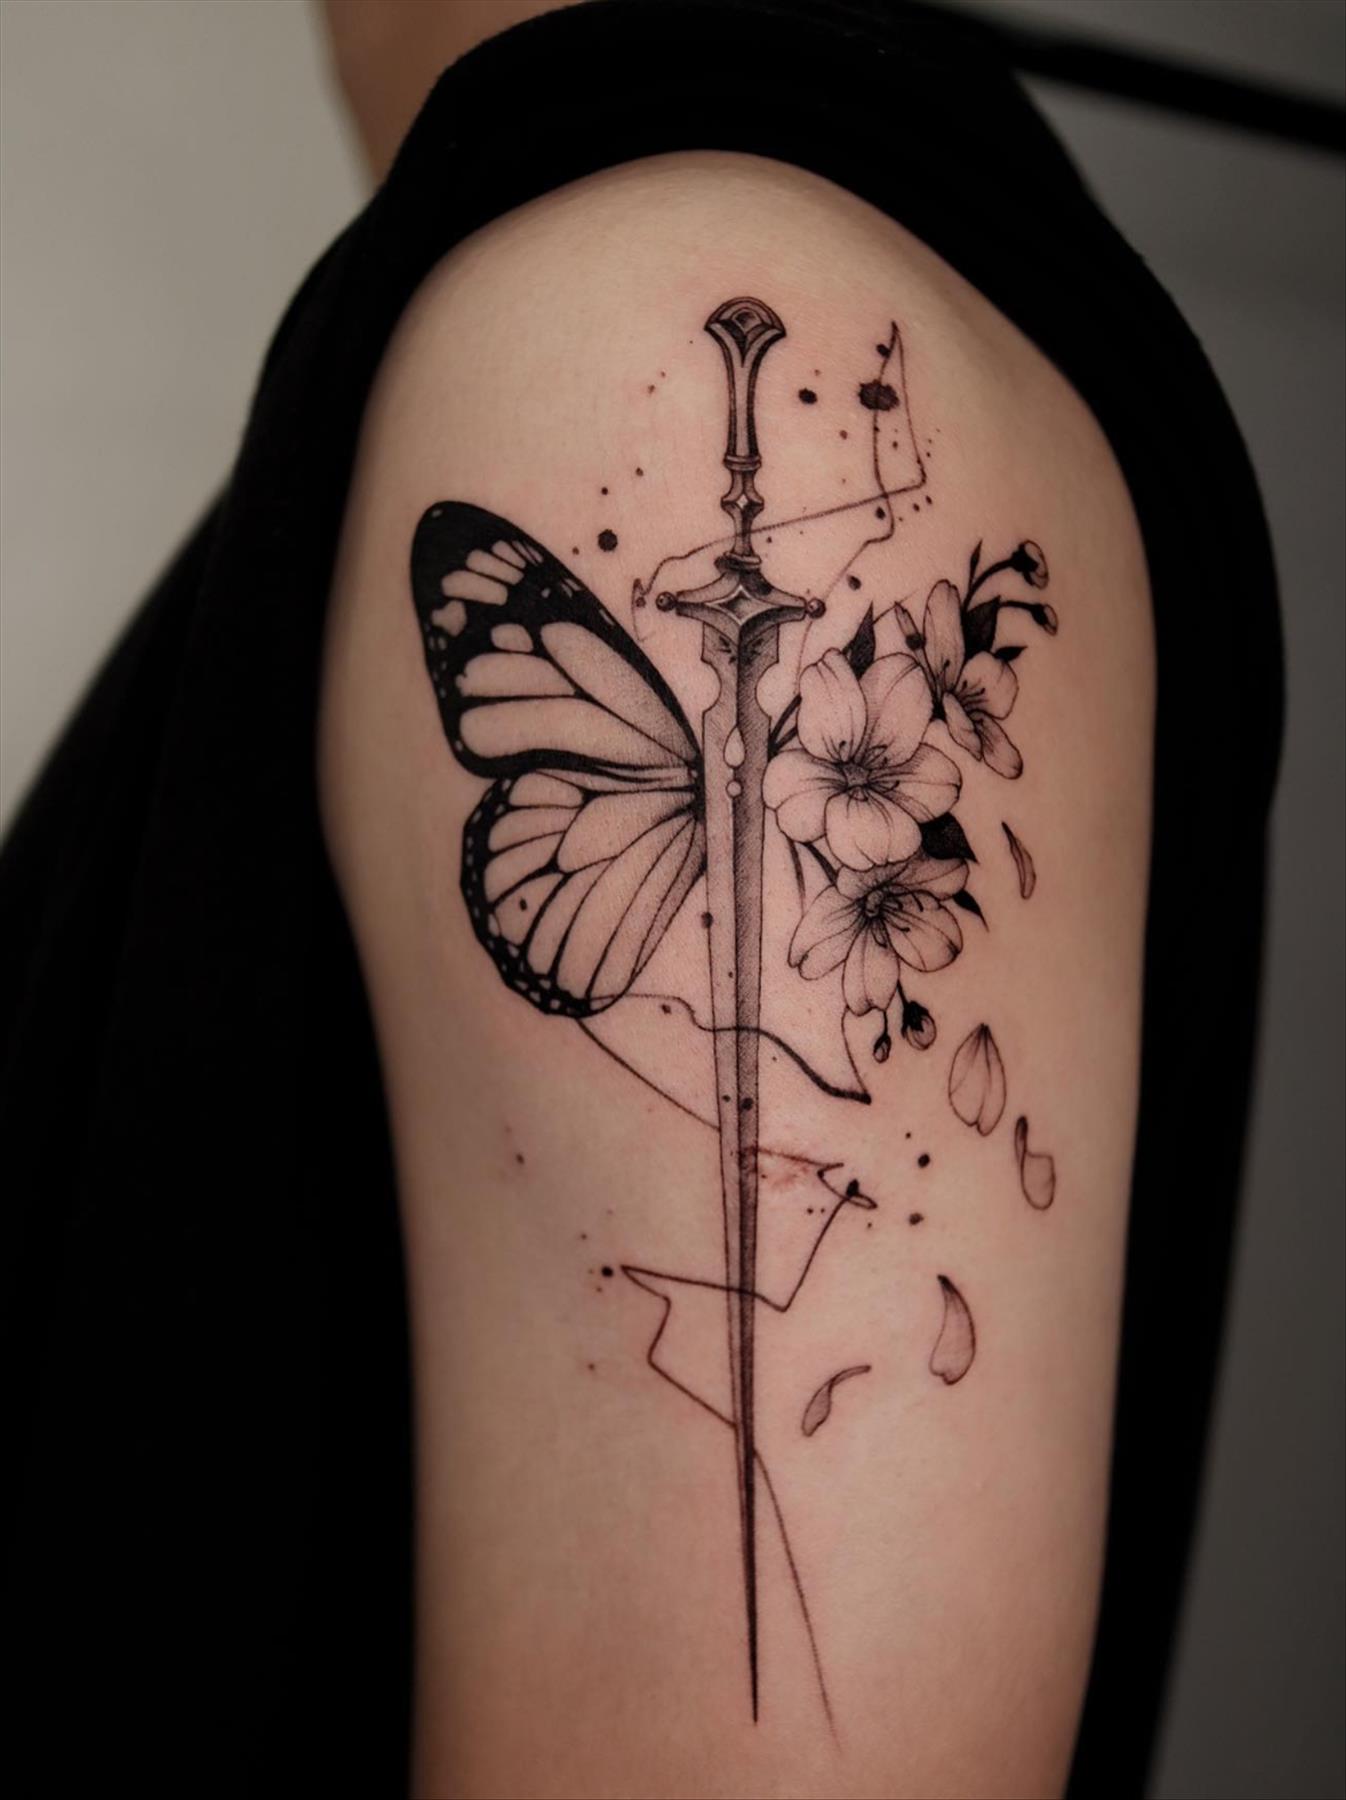 Captivating Butterfly Tattoo Designs for Women To Wear